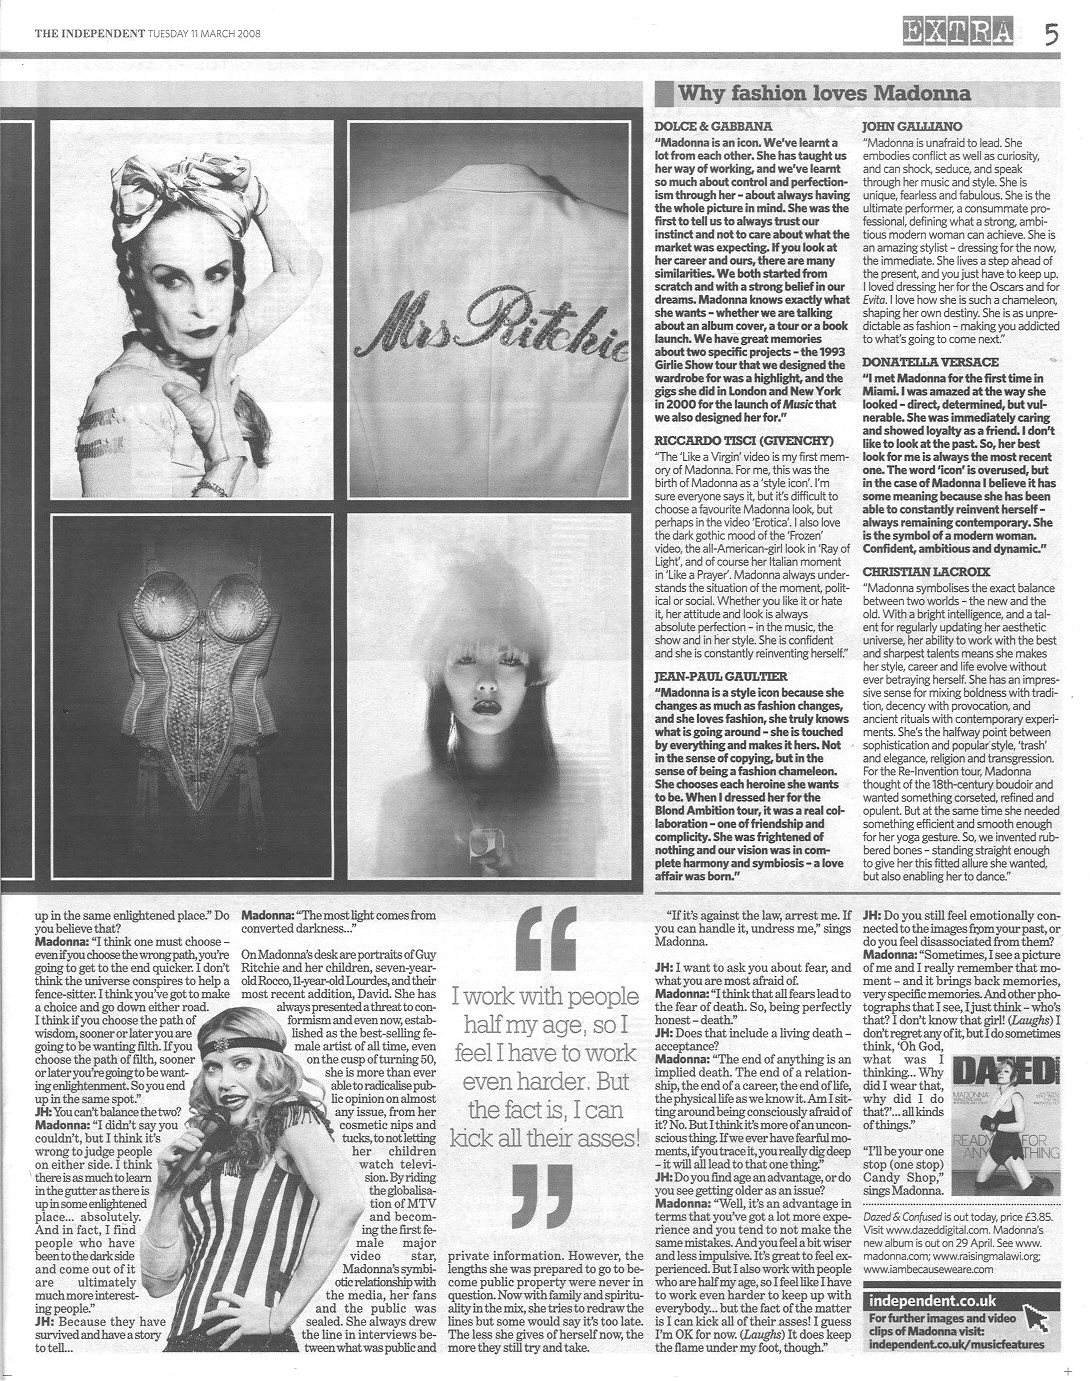 Madonna special in The Independent